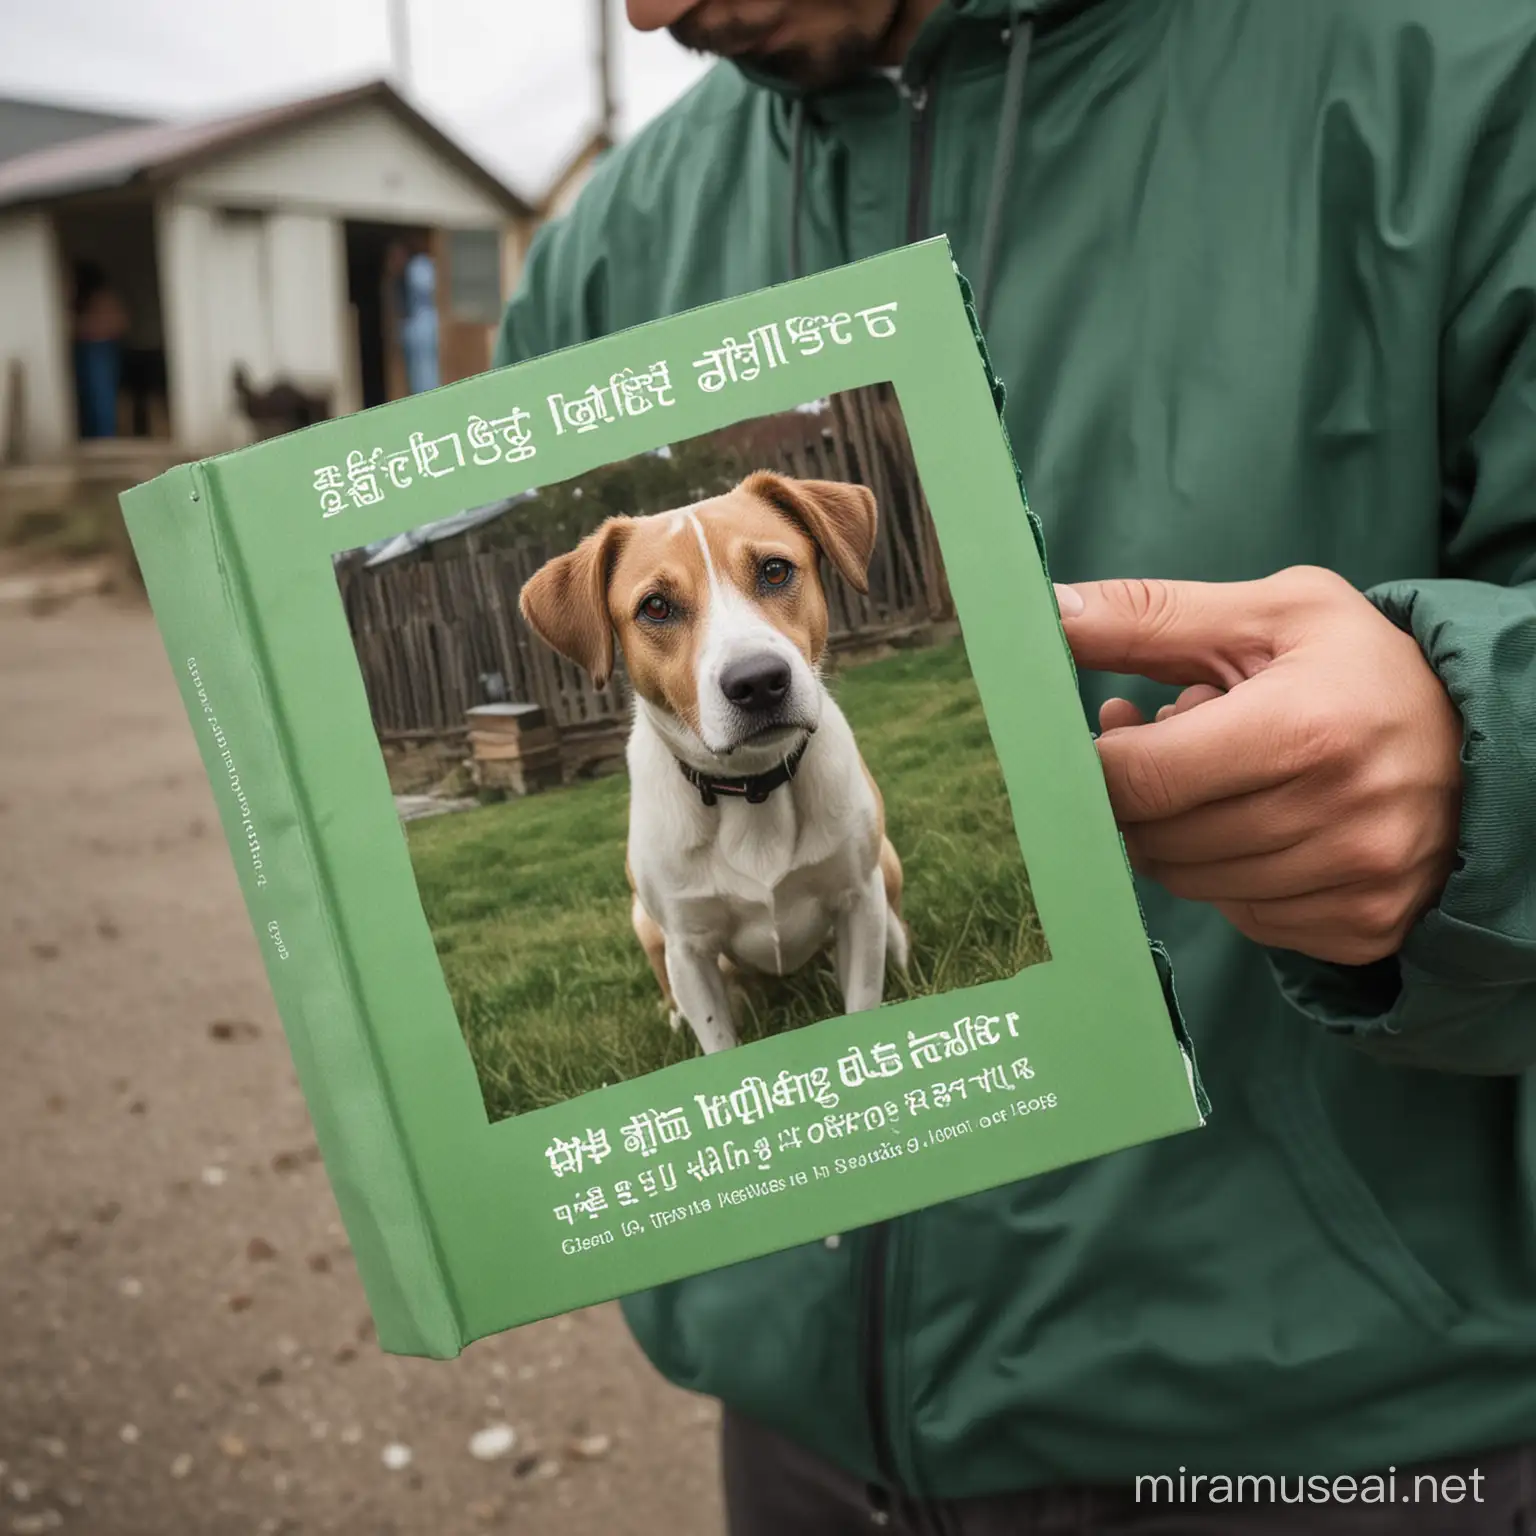 create a deep-focus image of a person standing in front of a  shelter for dogs, holding a book with the green cover visible in their hand, focusing on the book. Color-friendly, compassionate shades. 
65 / 5 000
Výsledky překladu
Výsledek překladu
if there is a picture of a dog in the picture, it should be smaller and light in color